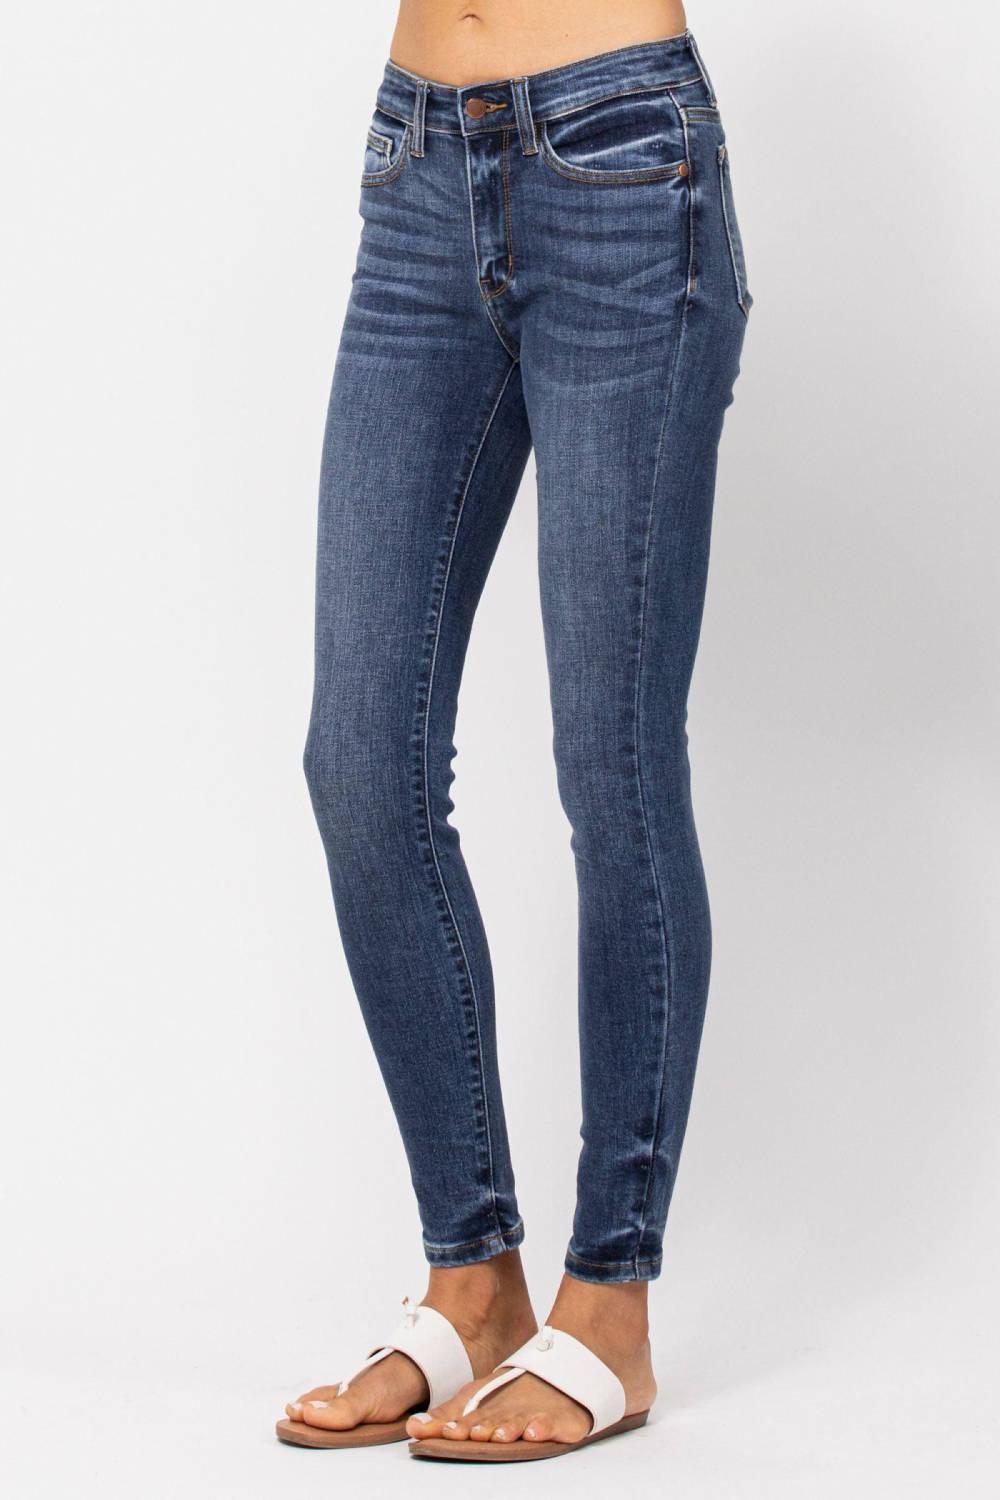 Judy Blue Mid-Rise Handstand Classic Skinny - Strawberry Moon Boutique